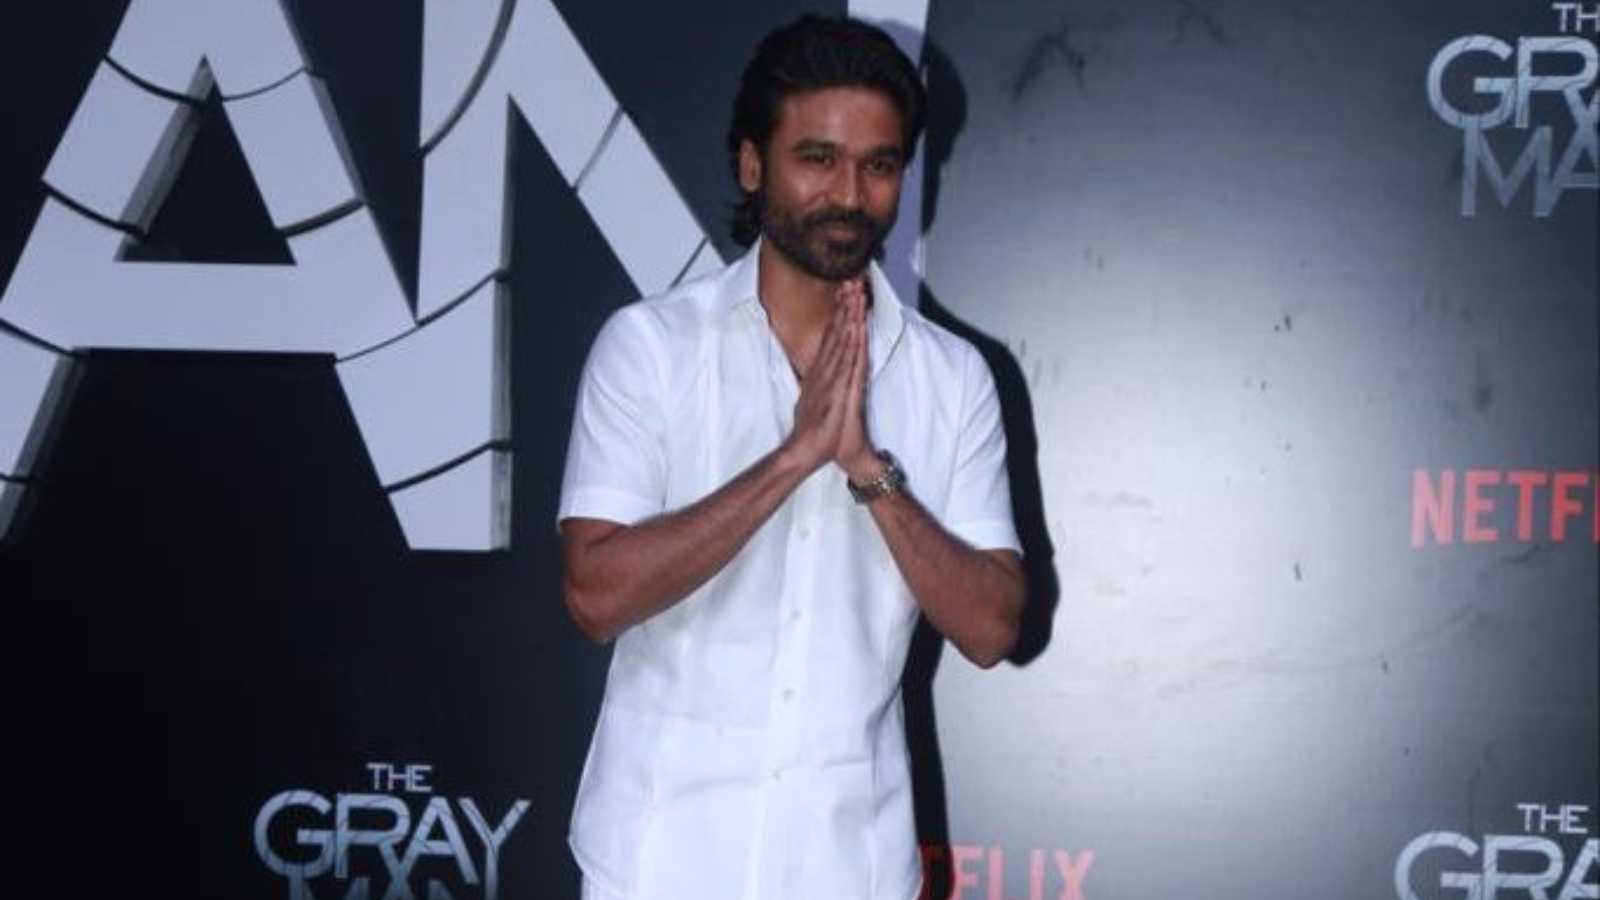 Dhanush is done with the 'South actor' tag: 'It will be great if we function together'